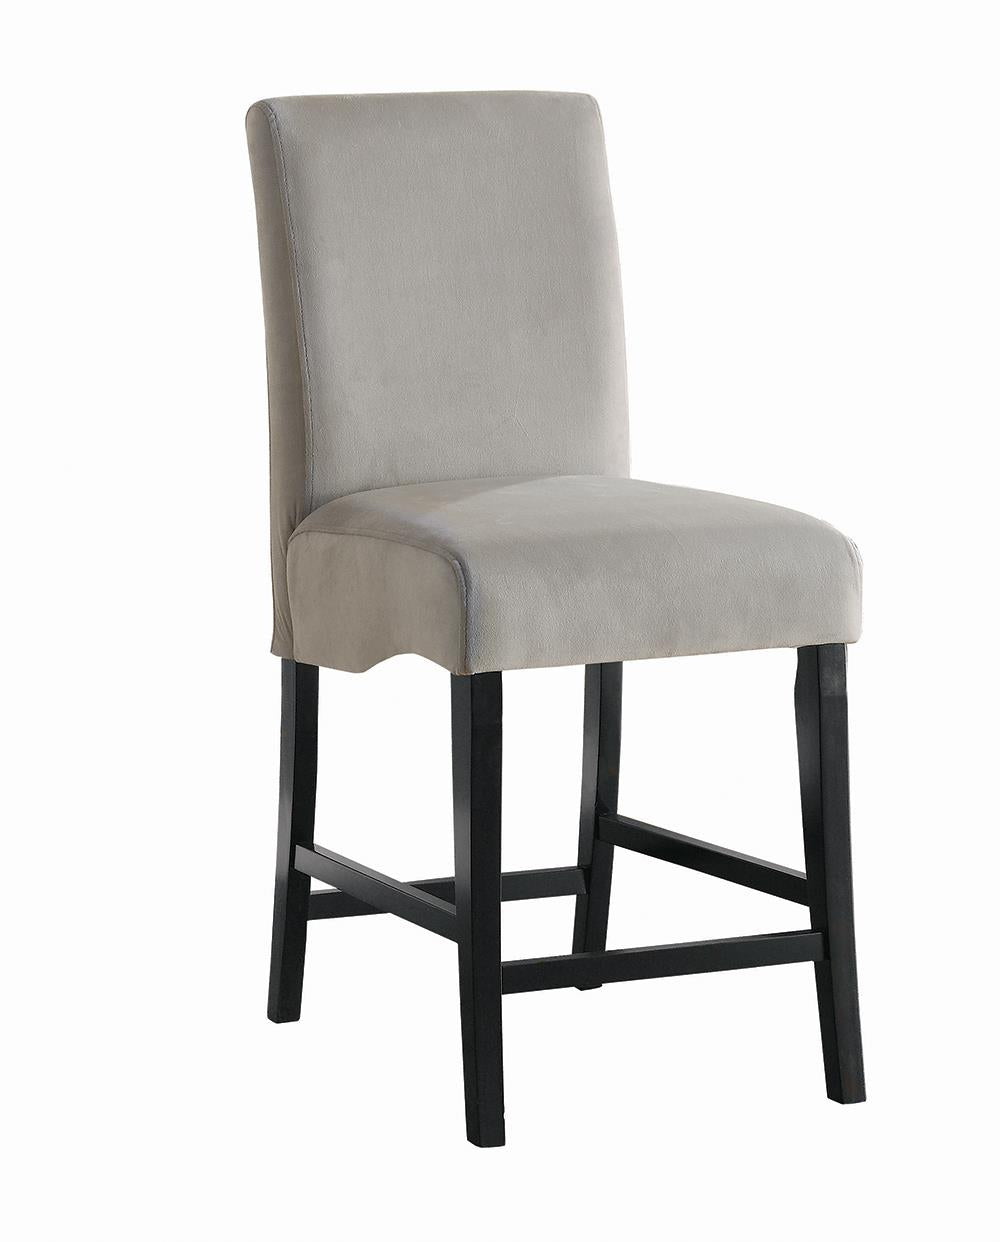 Stanton Upholstered Counter Height Chairs Grey and Black (Set of 2) Stanton Upholstered Counter Height Chairs Grey and Black (Set of 2) Half Price Furniture